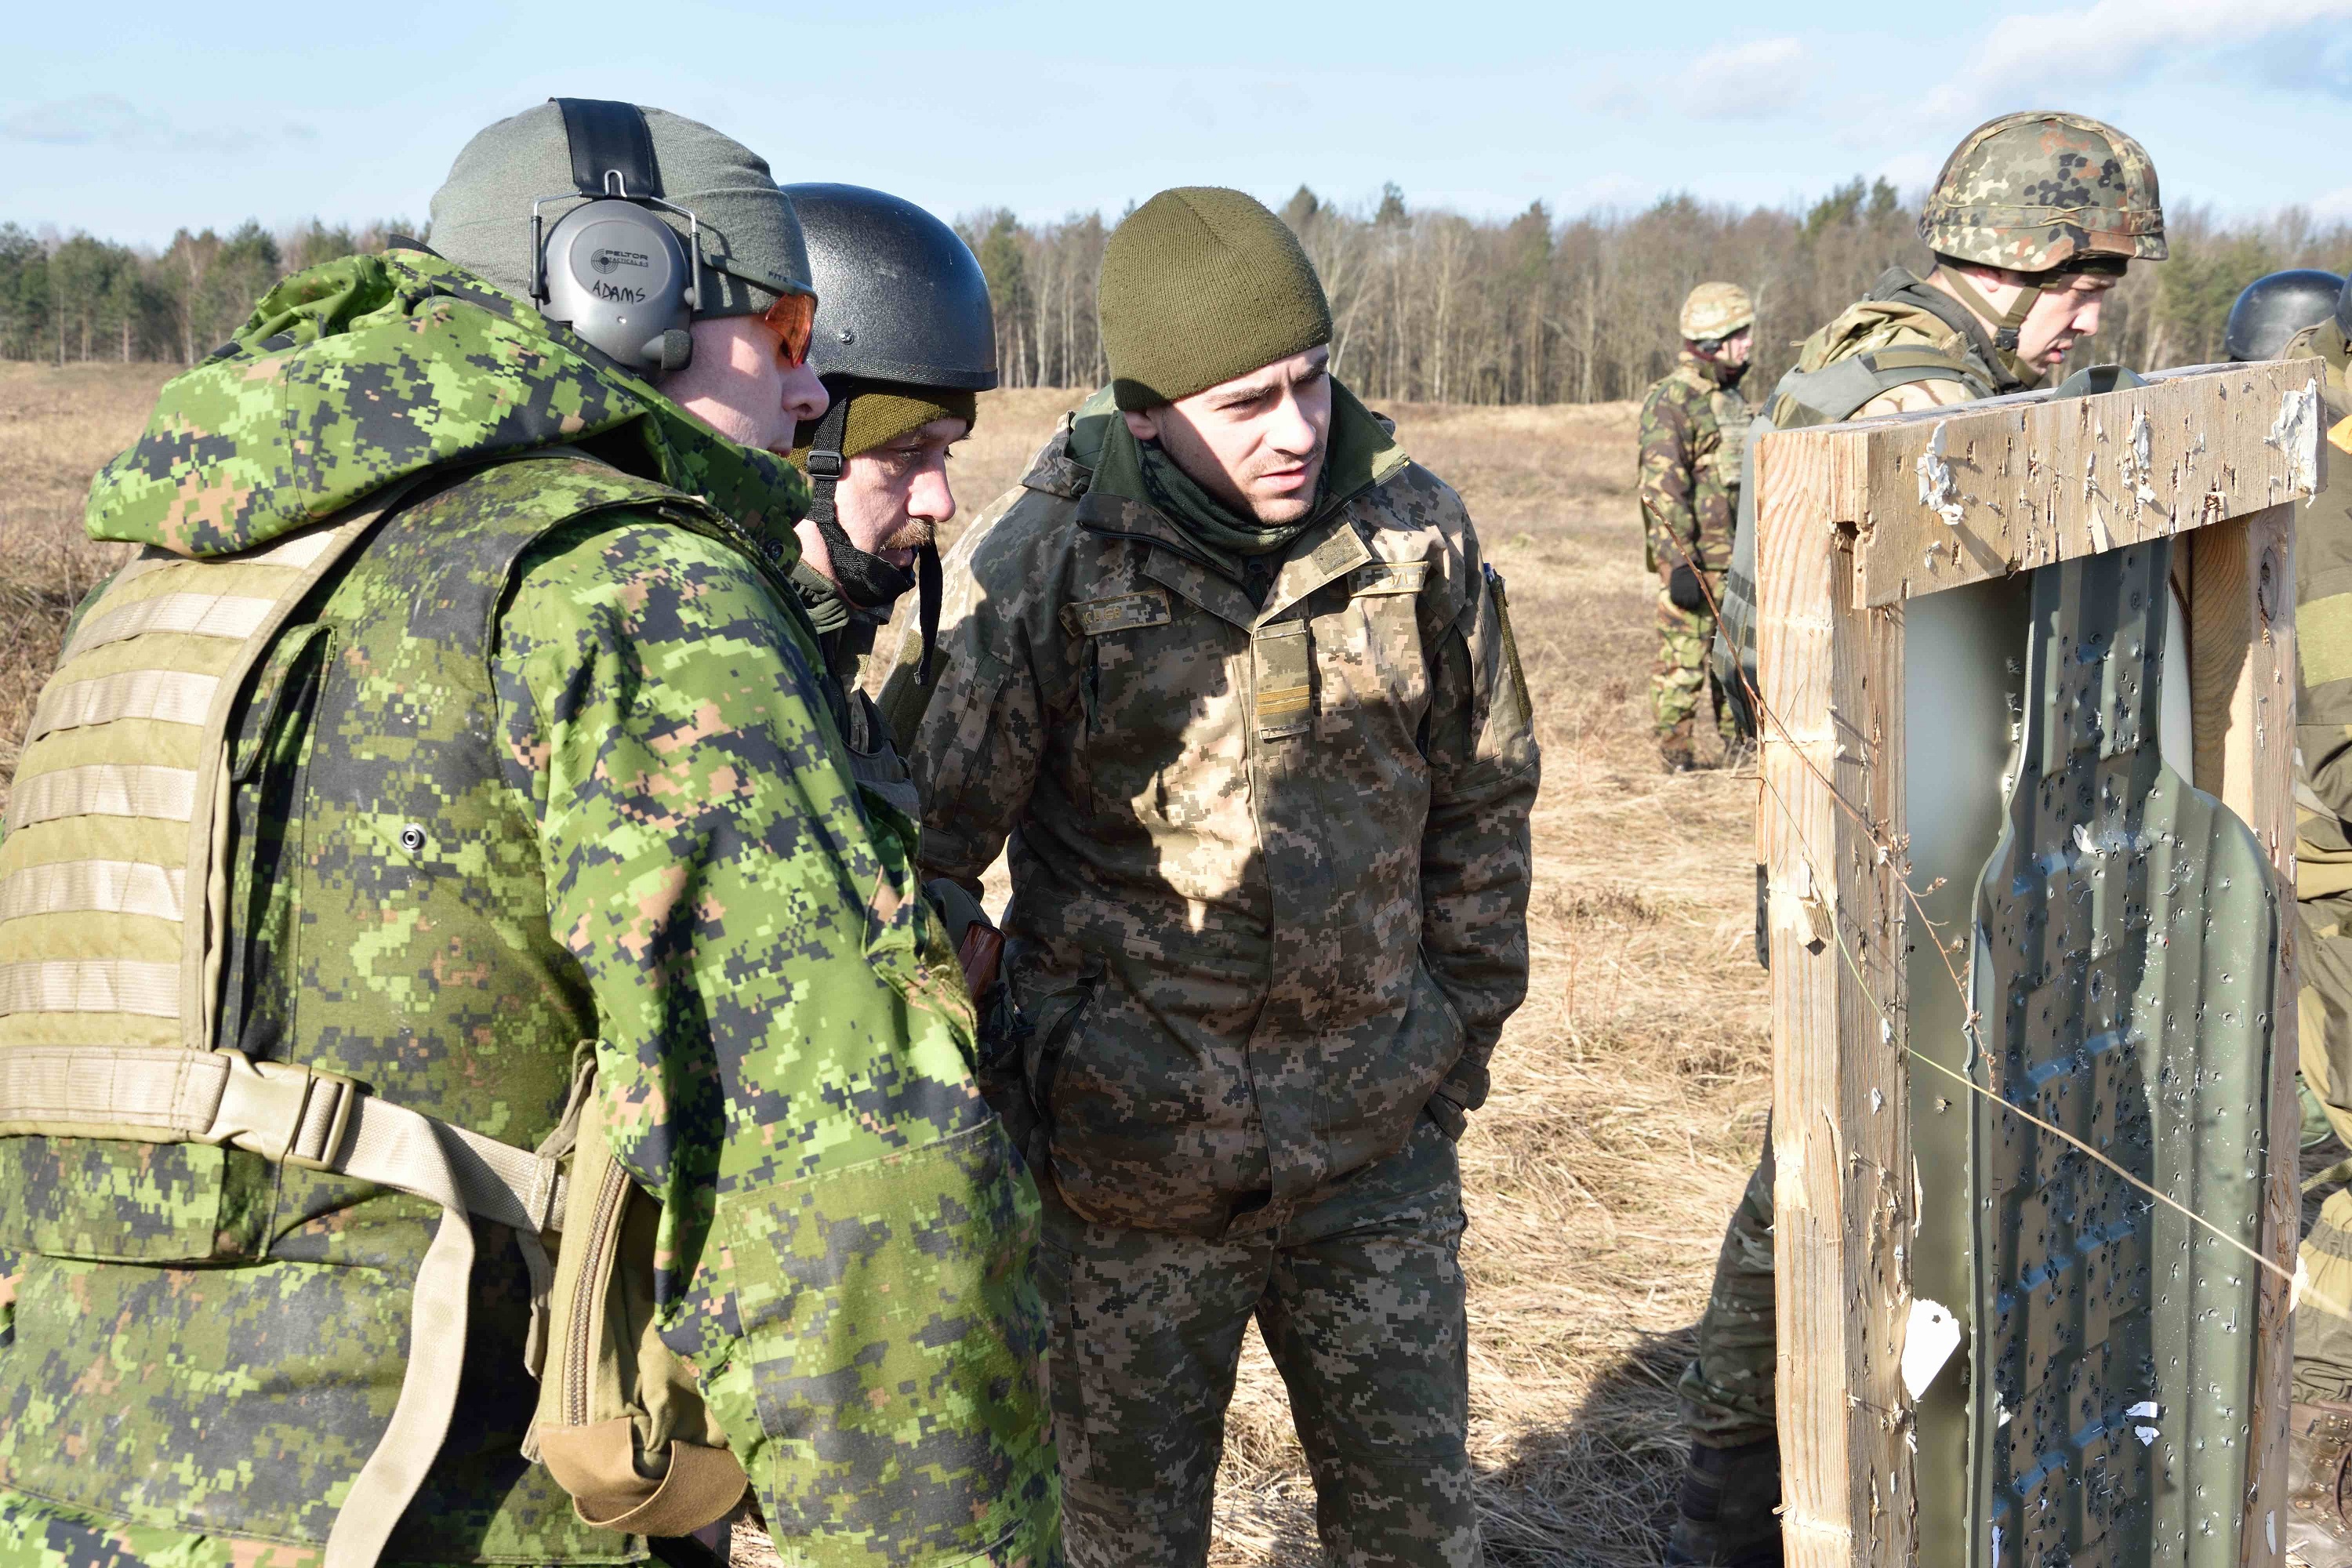 A Canadian Armed Forces Trainer from Joint Task Force-Ukraine mentors the Ukrainian Rotational Training Unit on personal weapons drills on a range during Operation UNIFIER at the International Peacekeeping and Security Centre in Starychi, Ukraine on January 31, 2018. Photo: Joint Task Force - Ukraine 